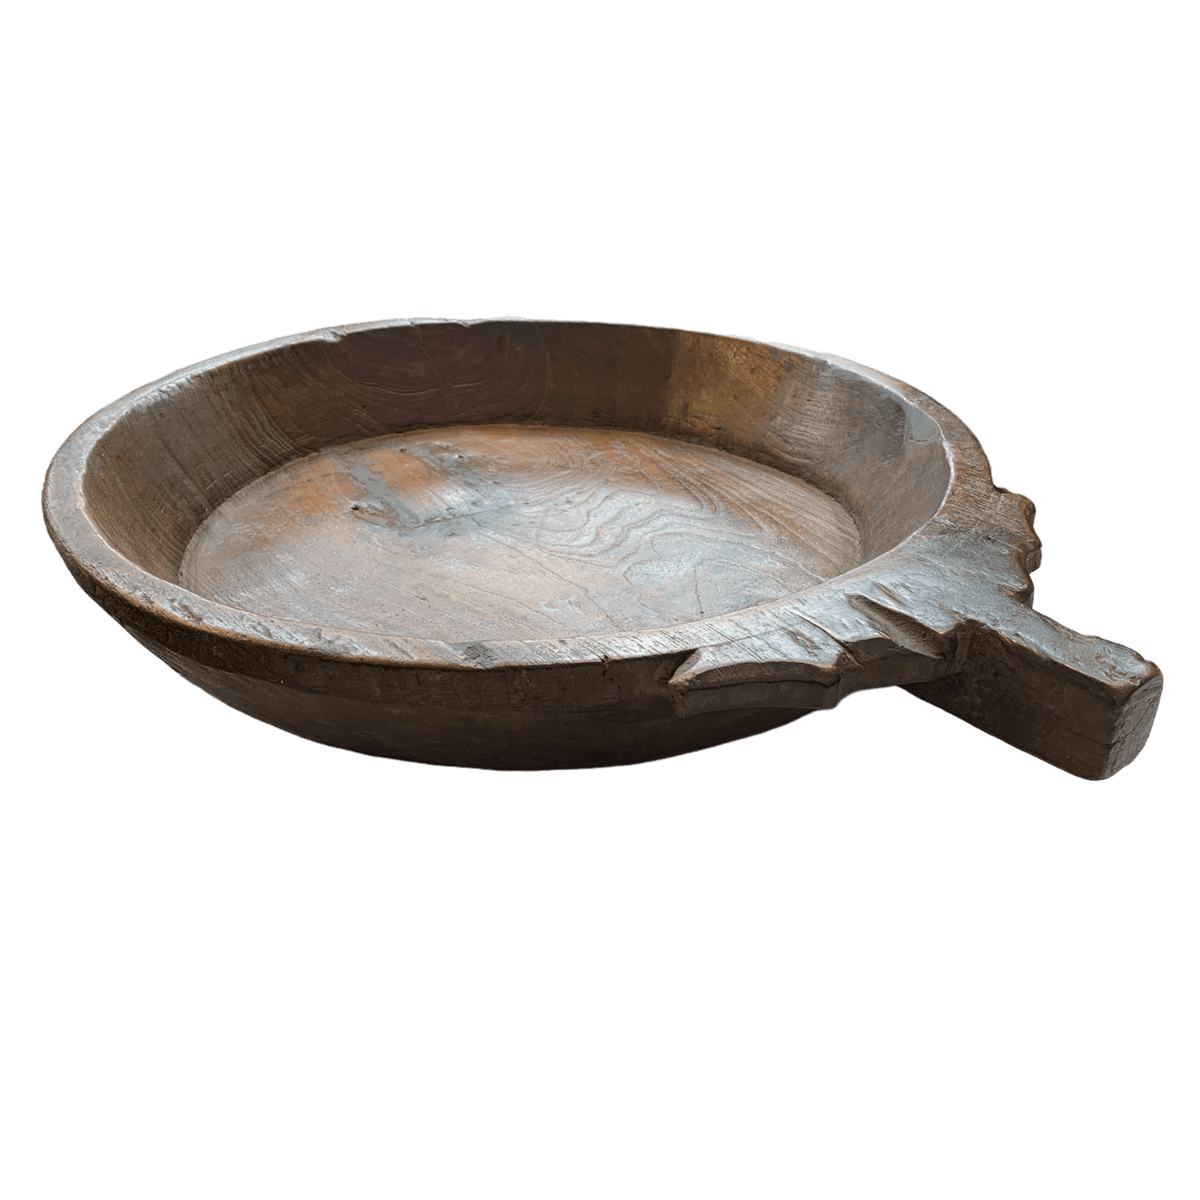 Large Rustic Wooden Bowl with Handle